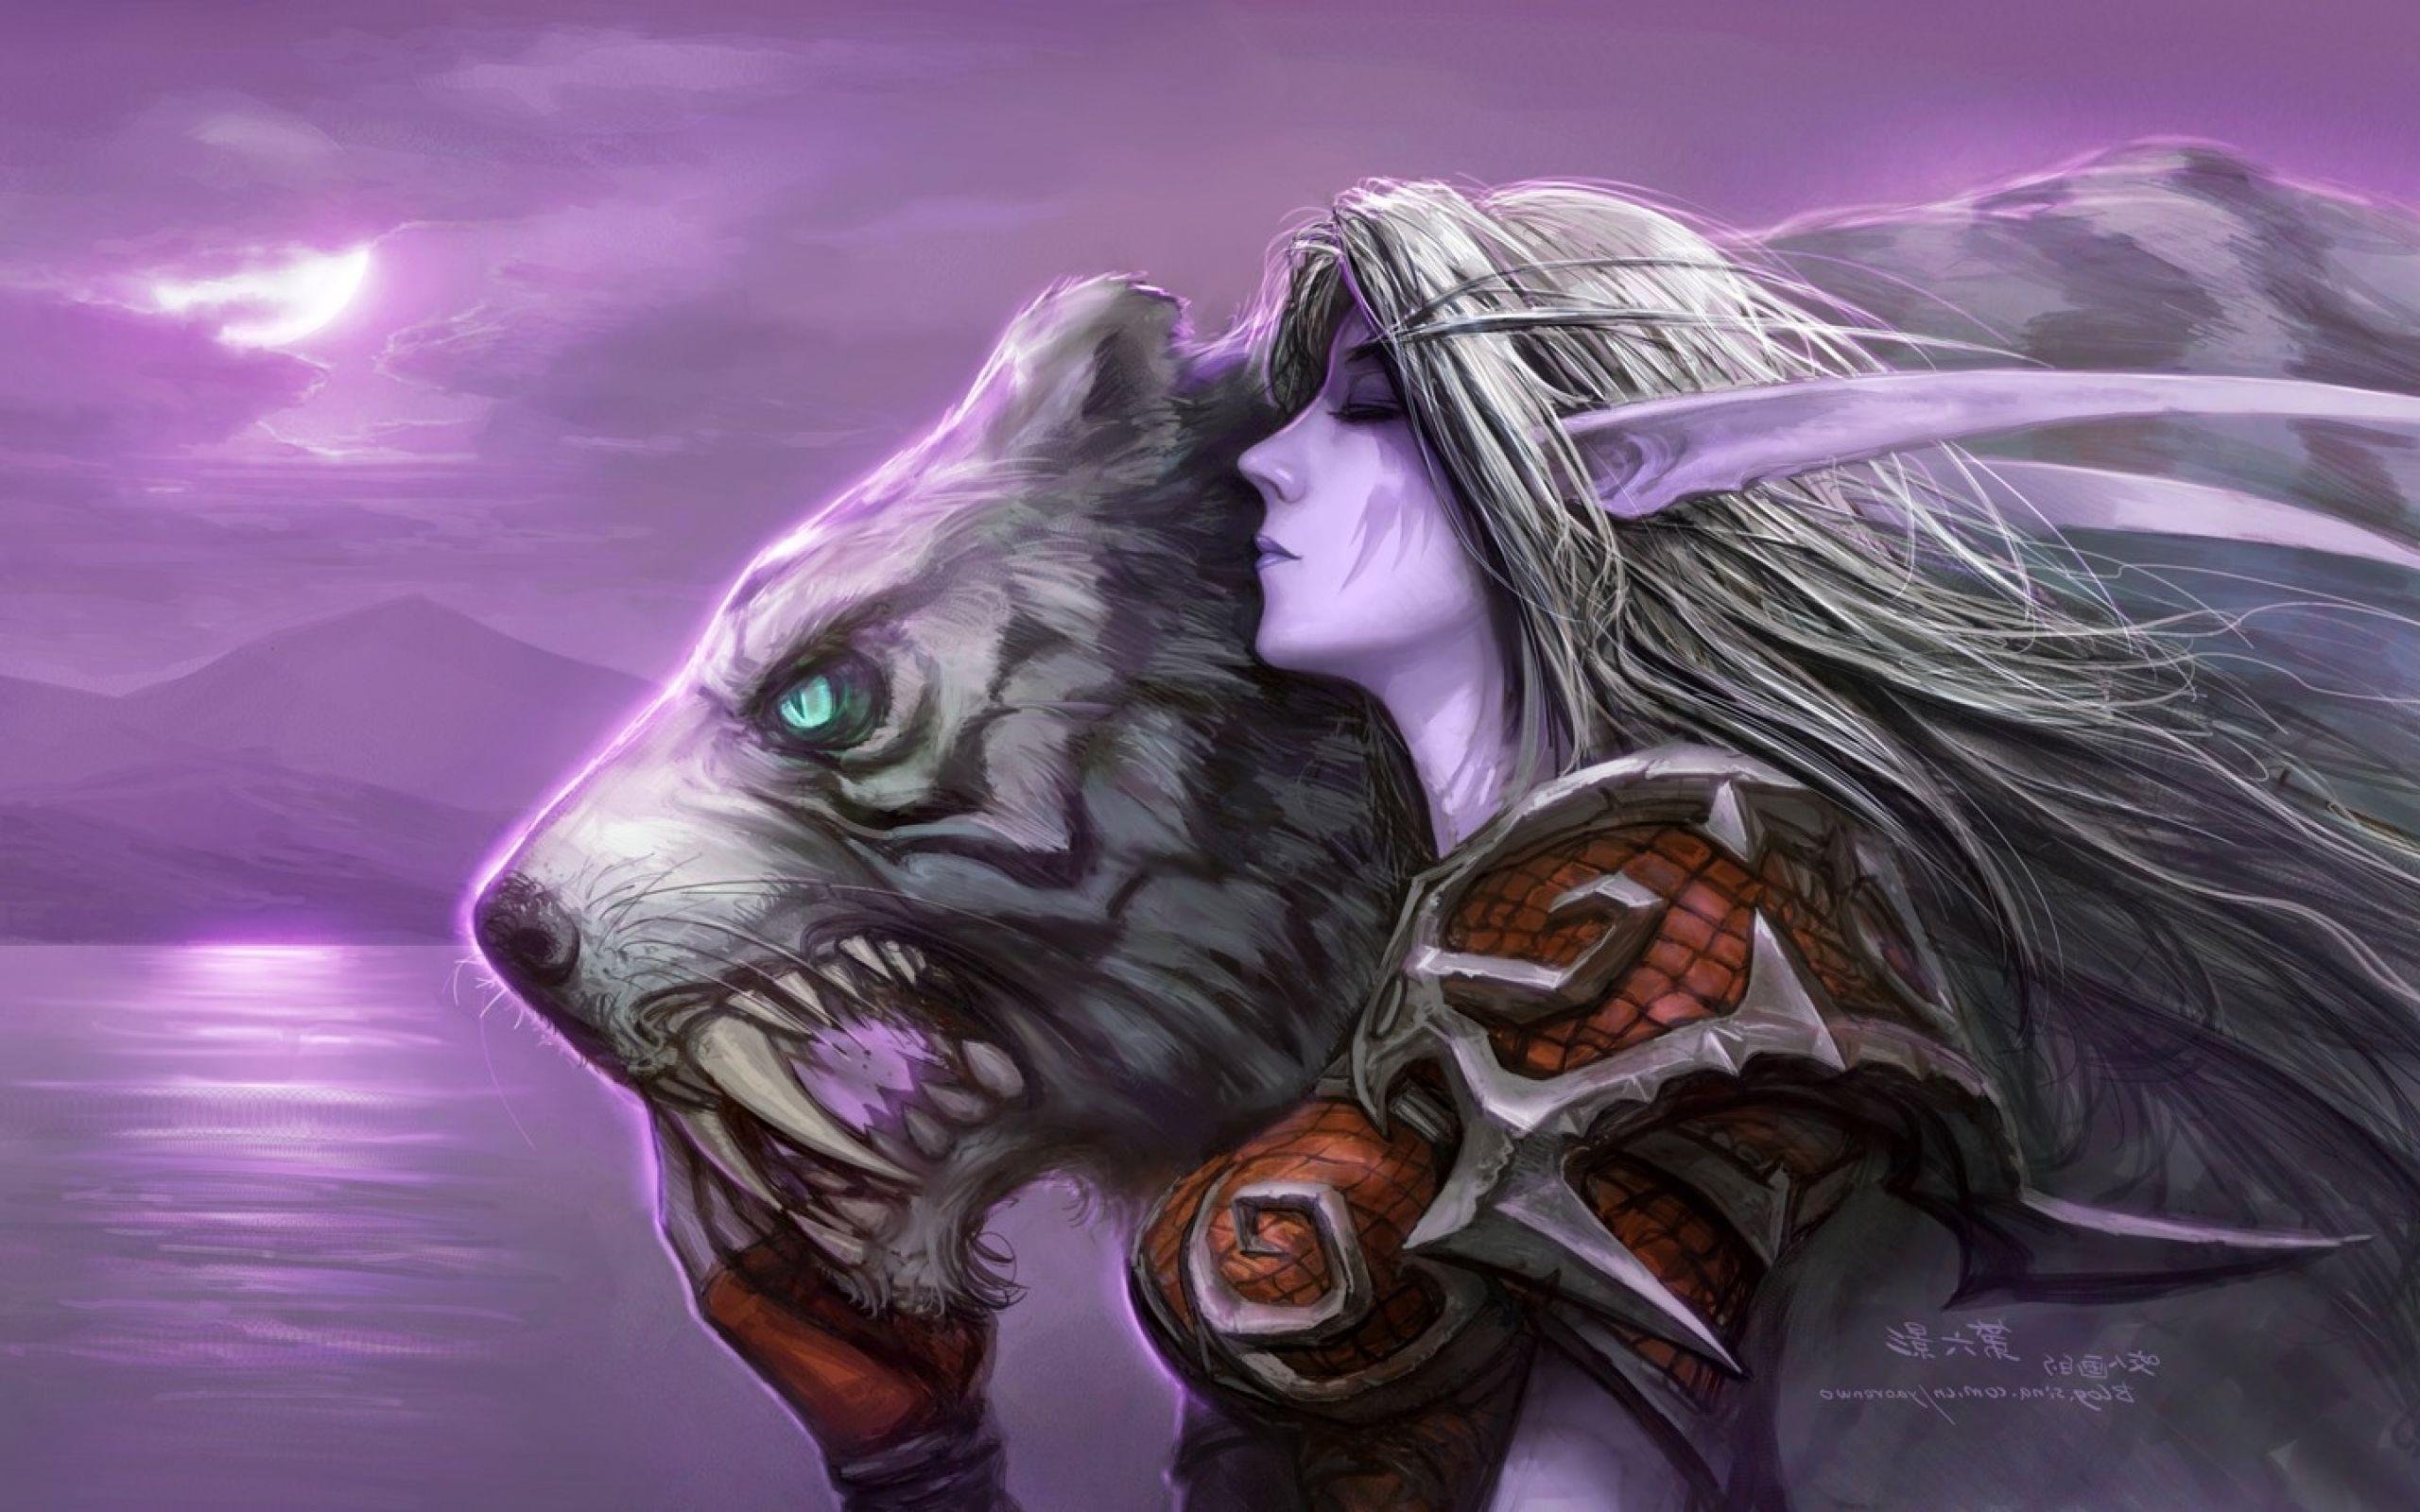 Download World Of Warcraft Armour Elves Wallpaper HD 2560x1600PX